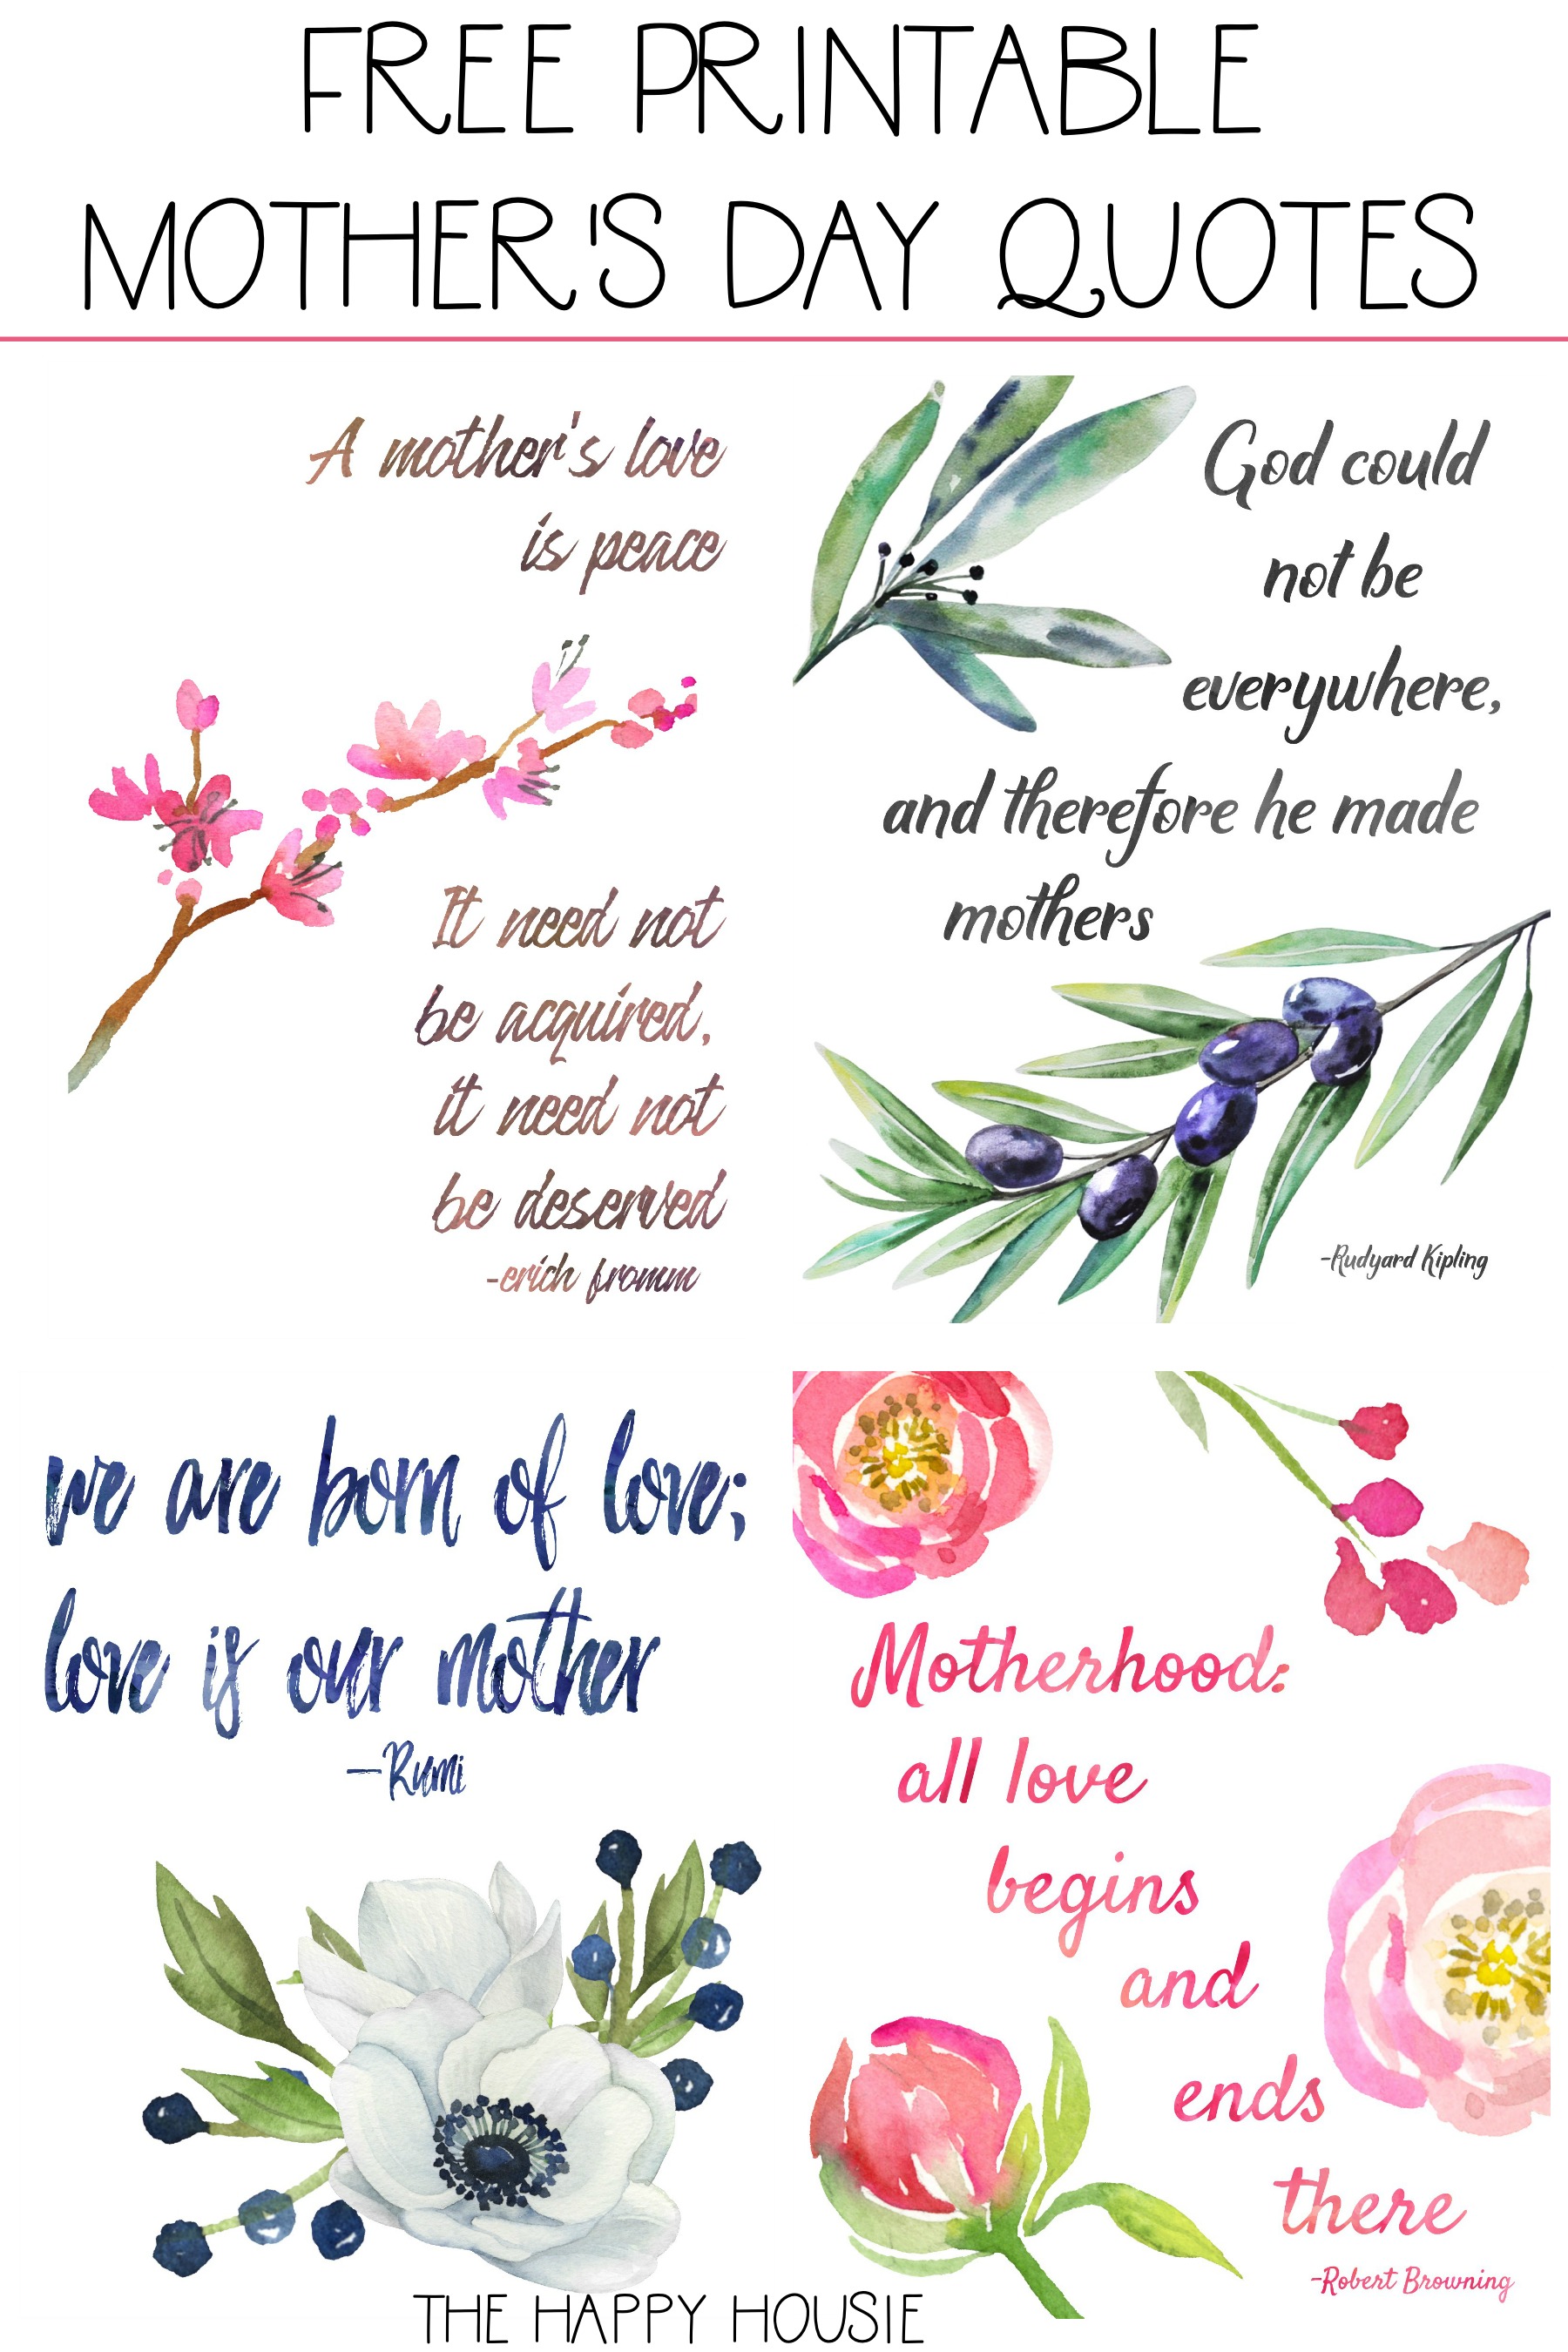 Mother's Day Quotes graphic.